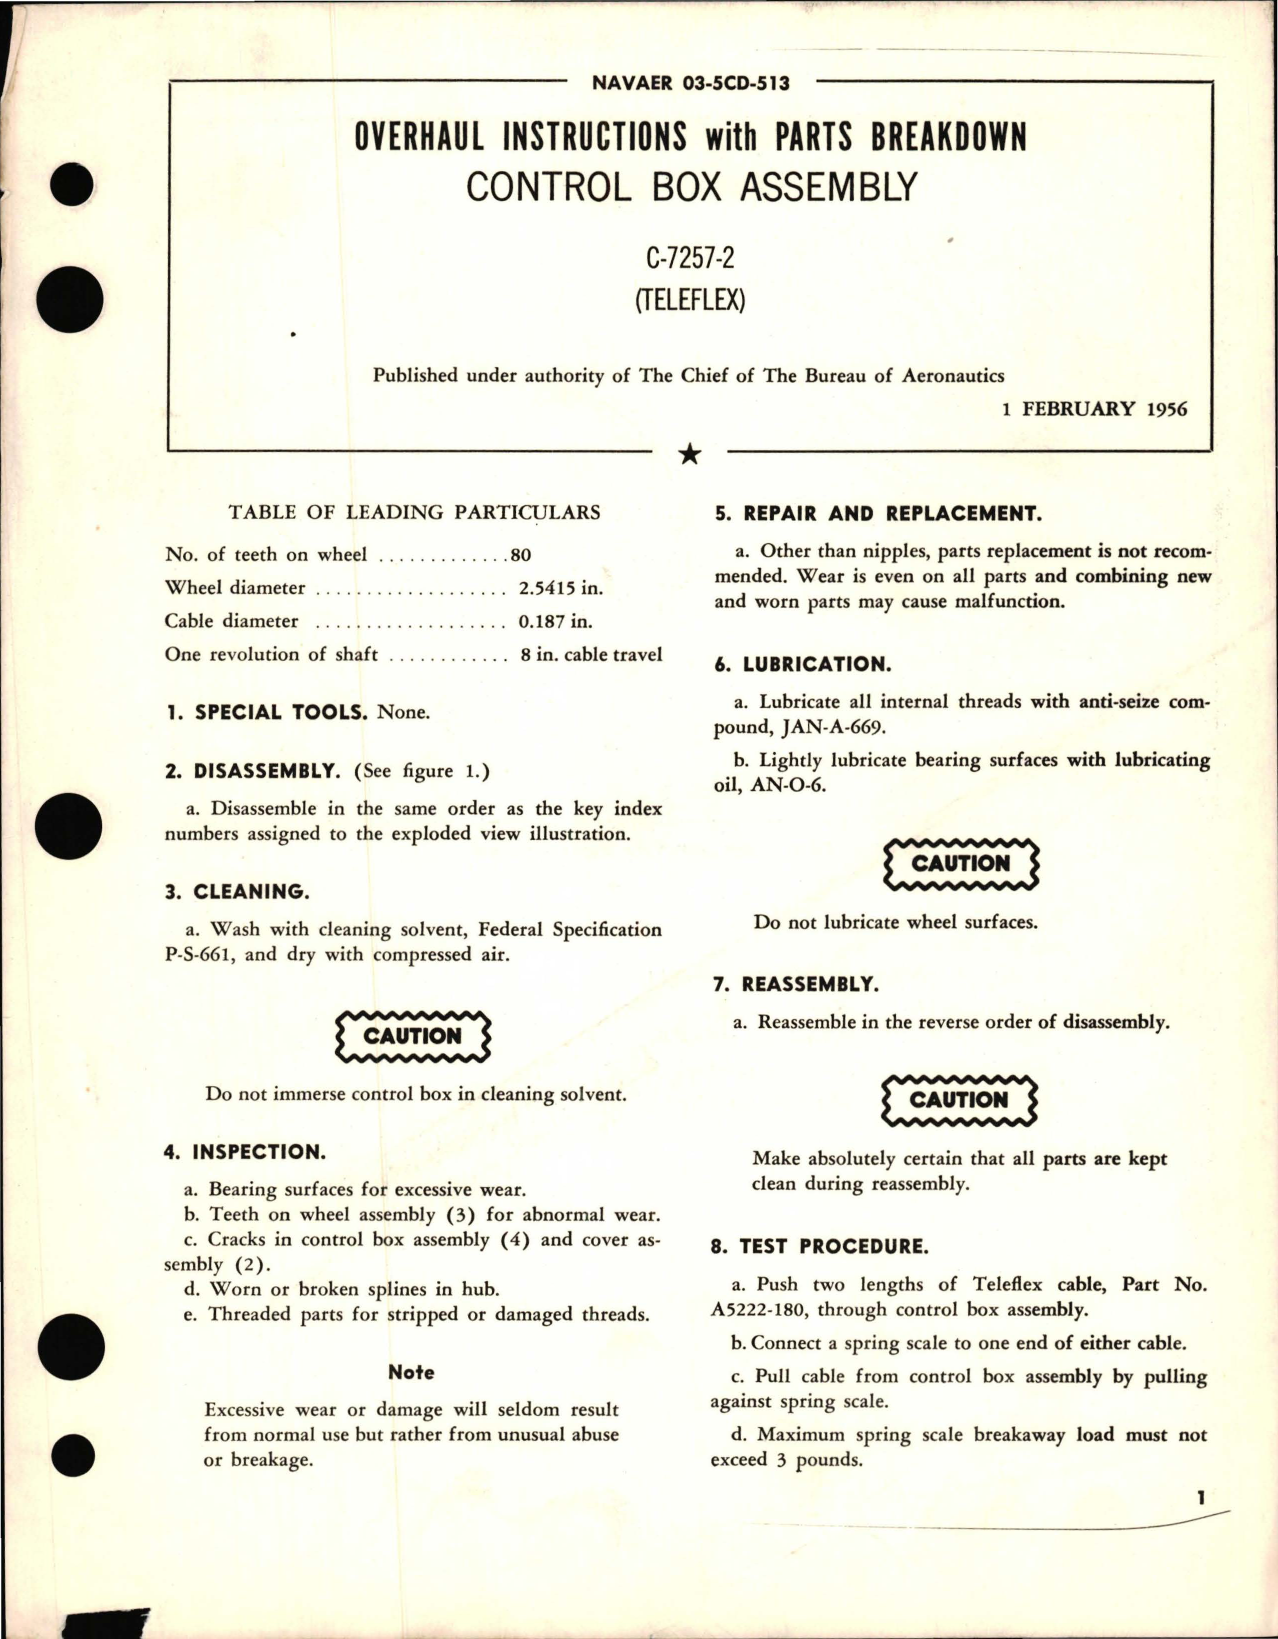 Sample page 1 from AirCorps Library document: Overhaul Instructions with Parts Breakdown for Control Box Assembly - C-7257-2